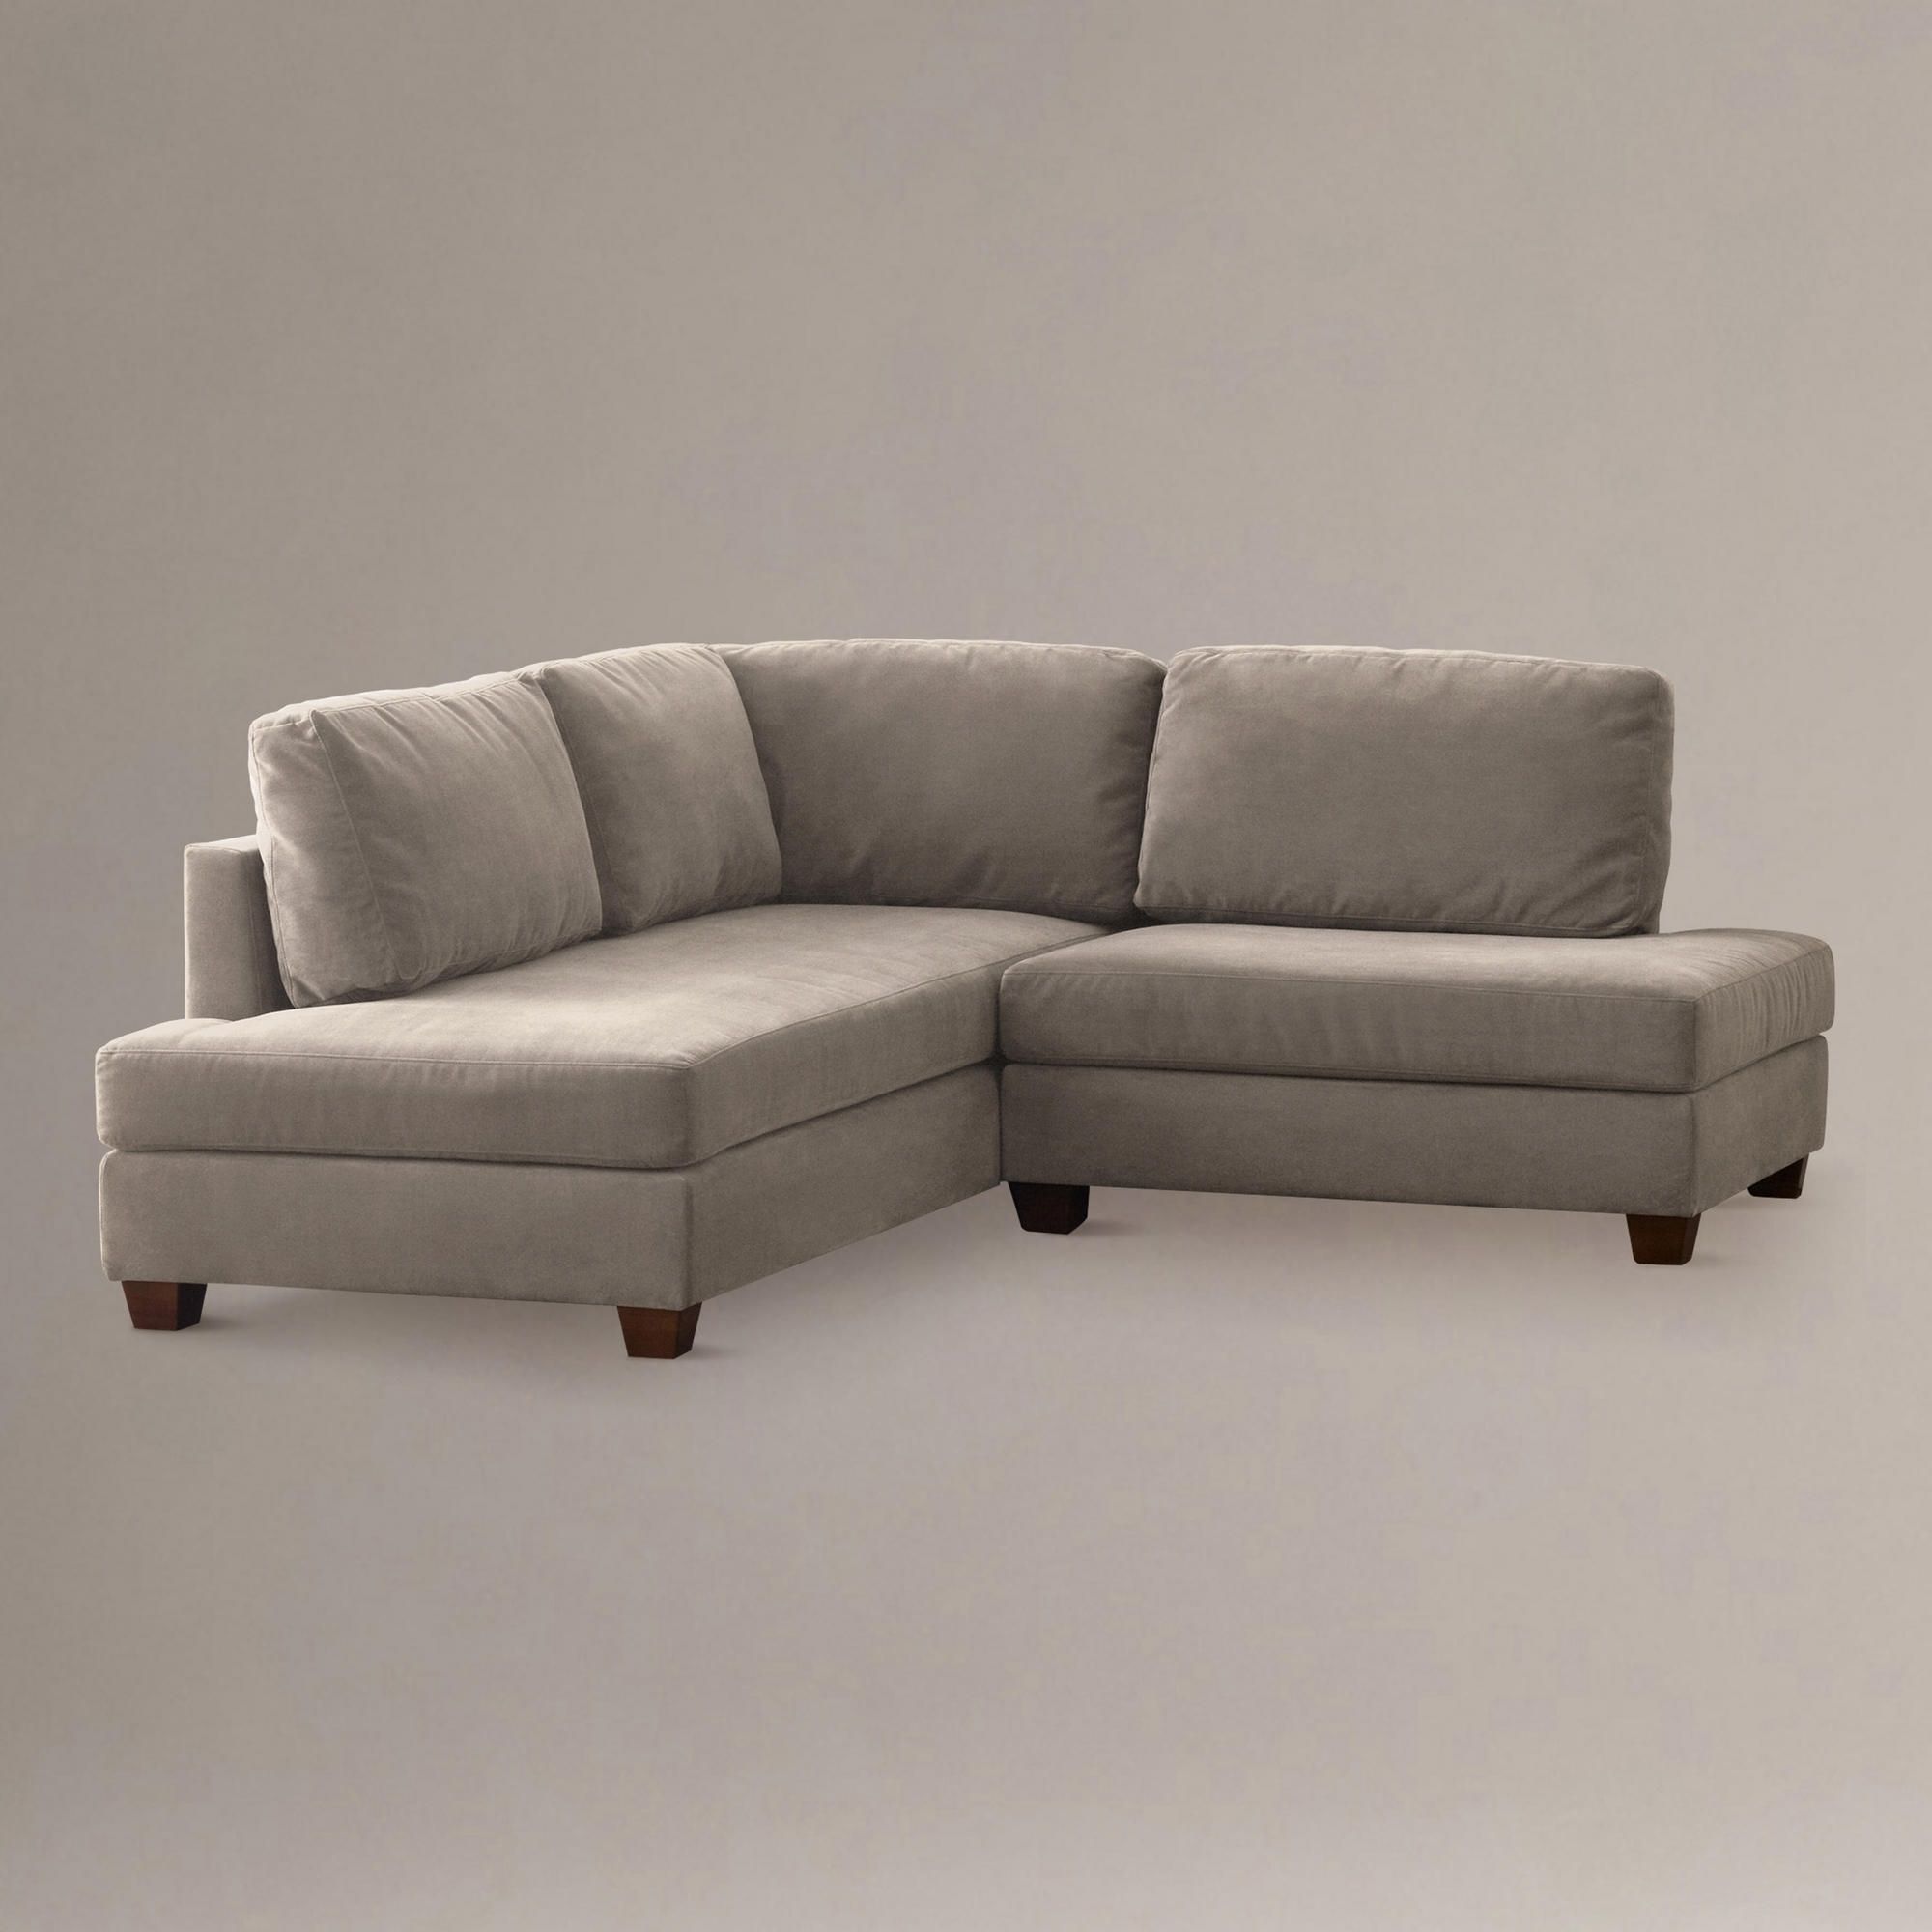 Small Armless Sofas Intended For Current Amazing Armless Sectional Sofas Small Spaces – Mediasupload (View 8 of 20)